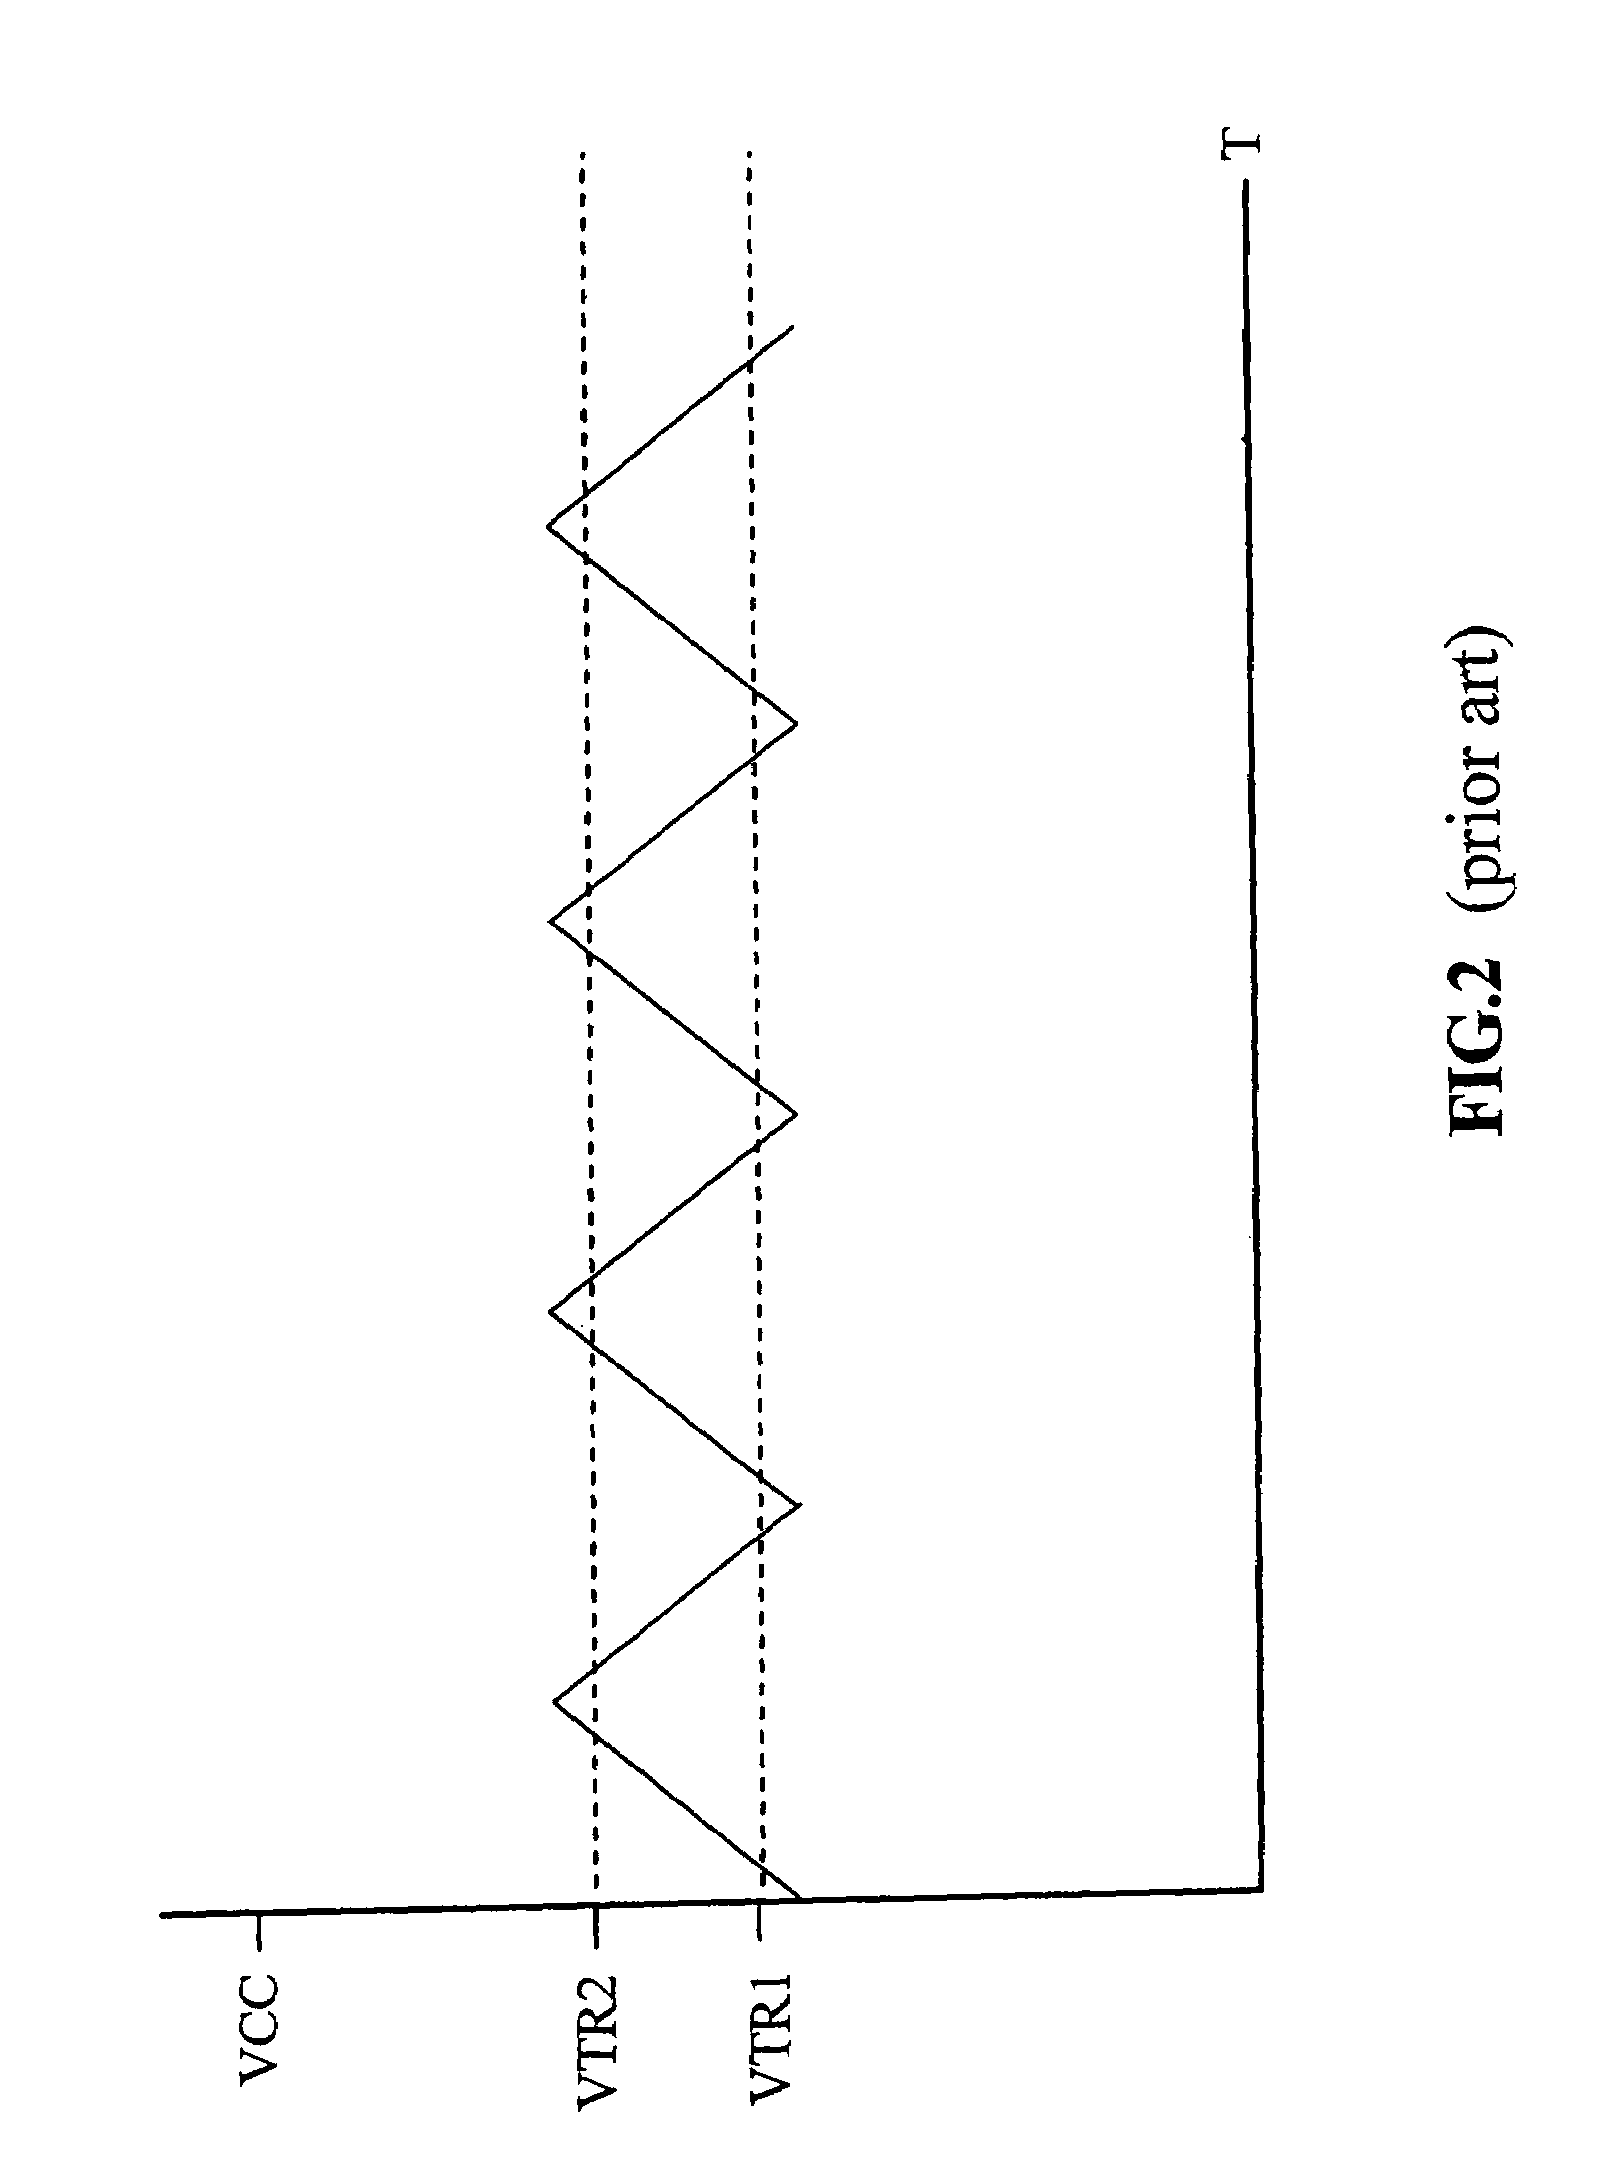 Structure of object proximity and position detector